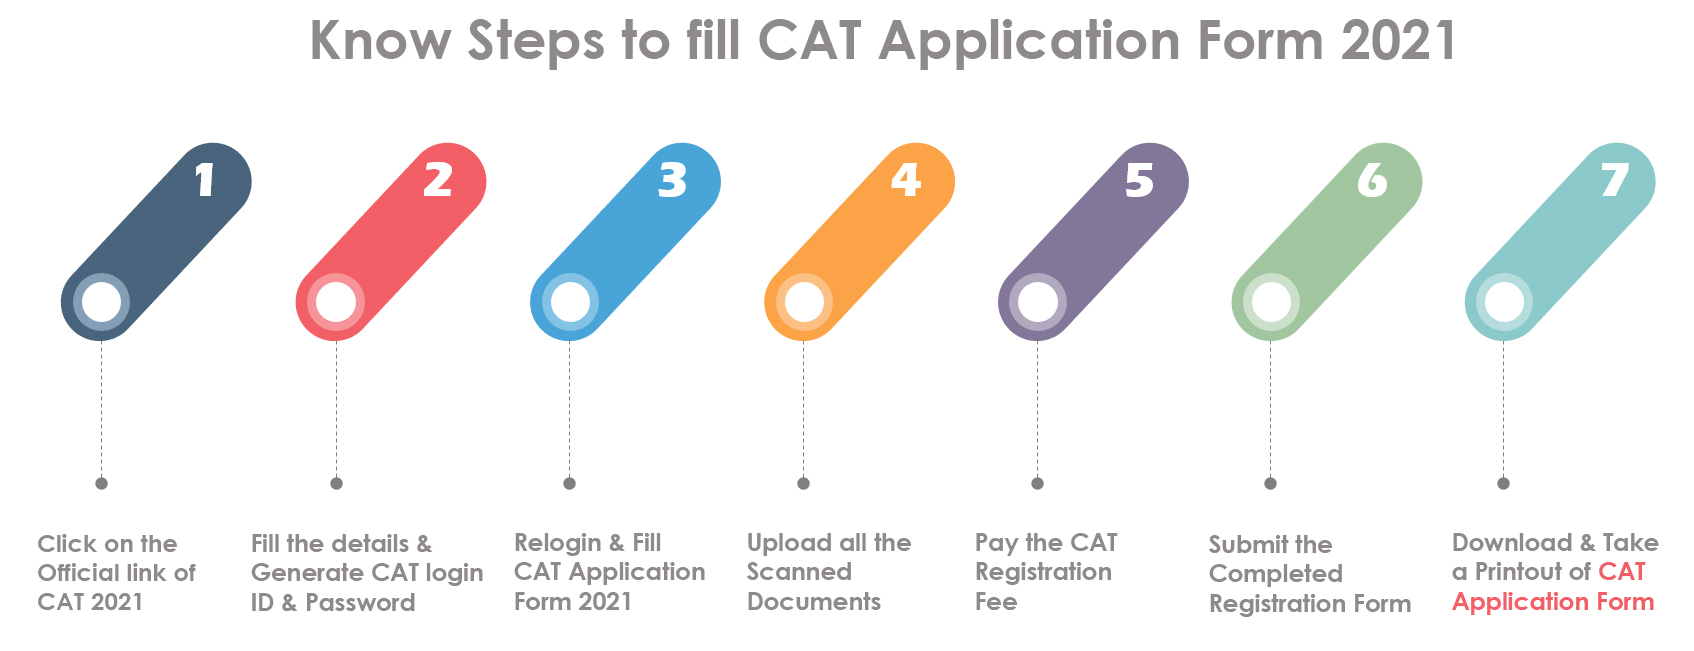 CAT Registration 2021 (Started) Application Form, How to Fill at